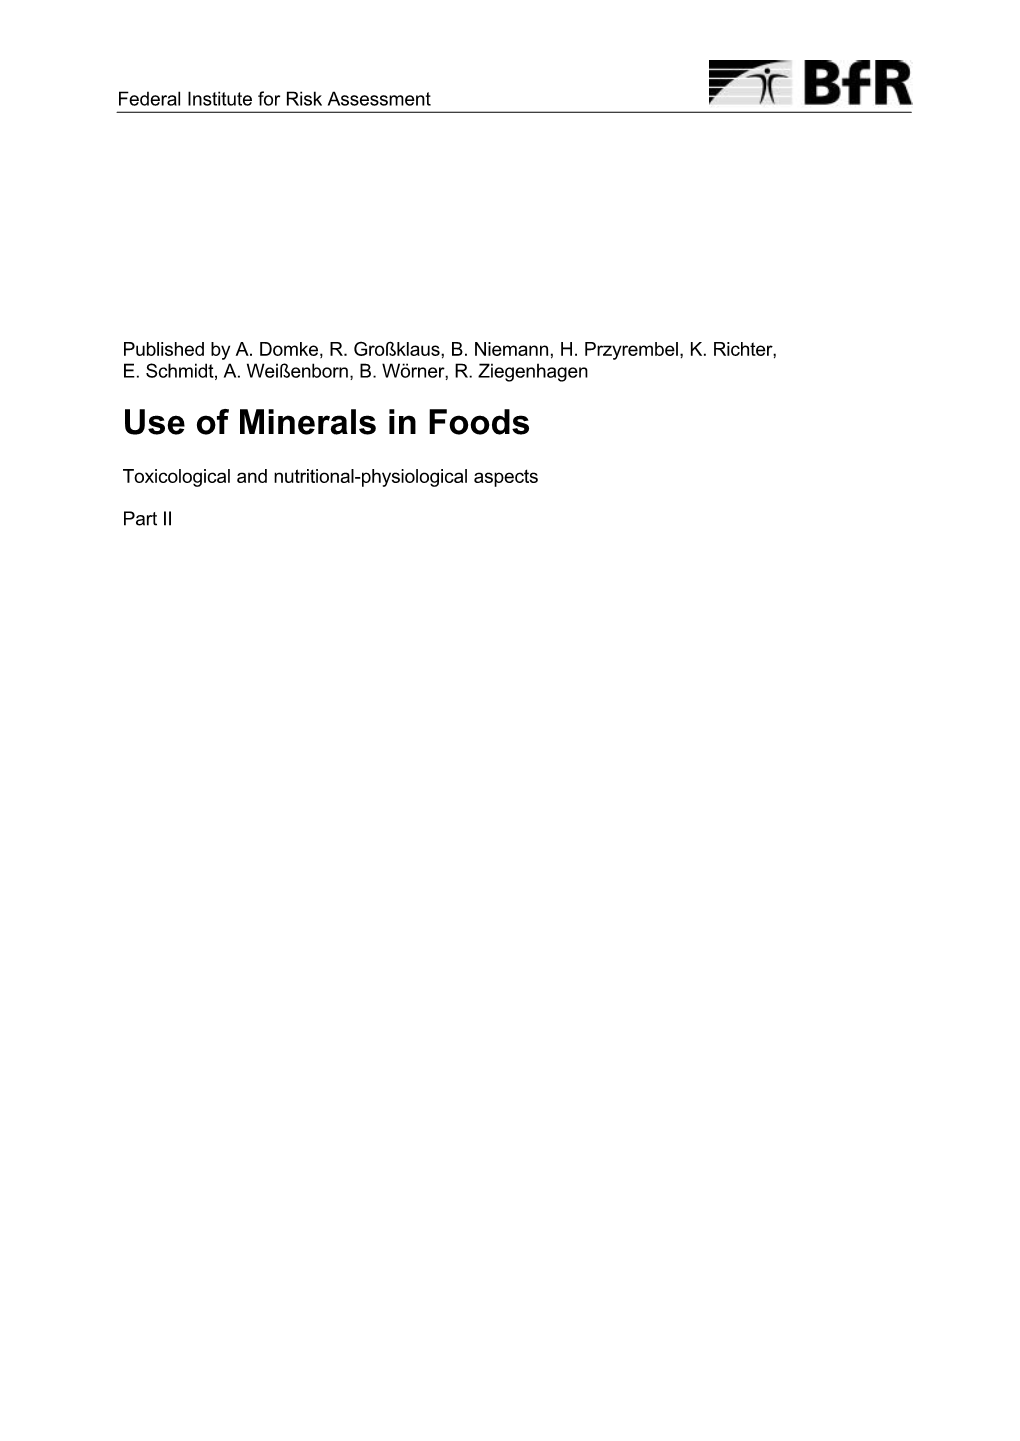 Use of Minerals in Foods